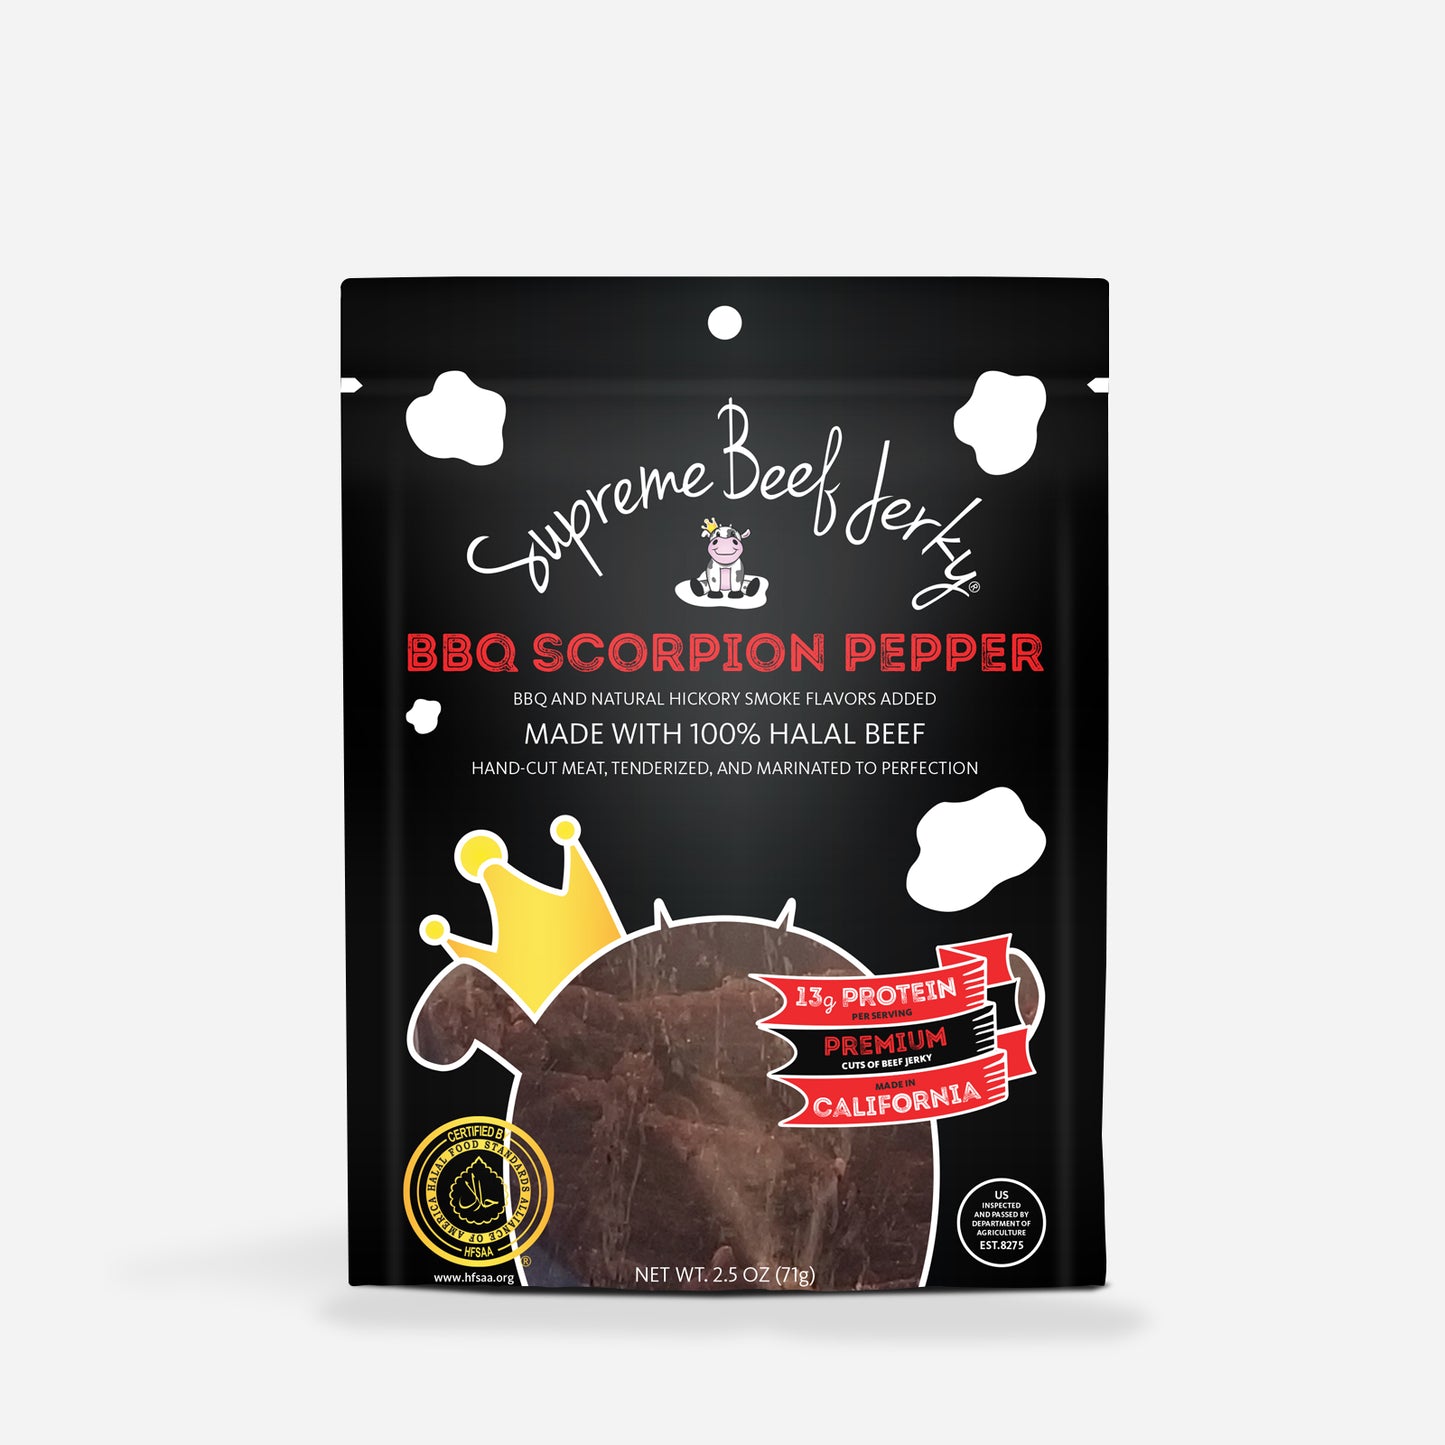 10-PACK, 2.5 OZ BAG, HALAL BEEF JERKY, MARINATED SPICY BEEF JERKY, HANDCRAFTED GOURMET MEAT SNACKS (BBQ SCORPION PEPPER)